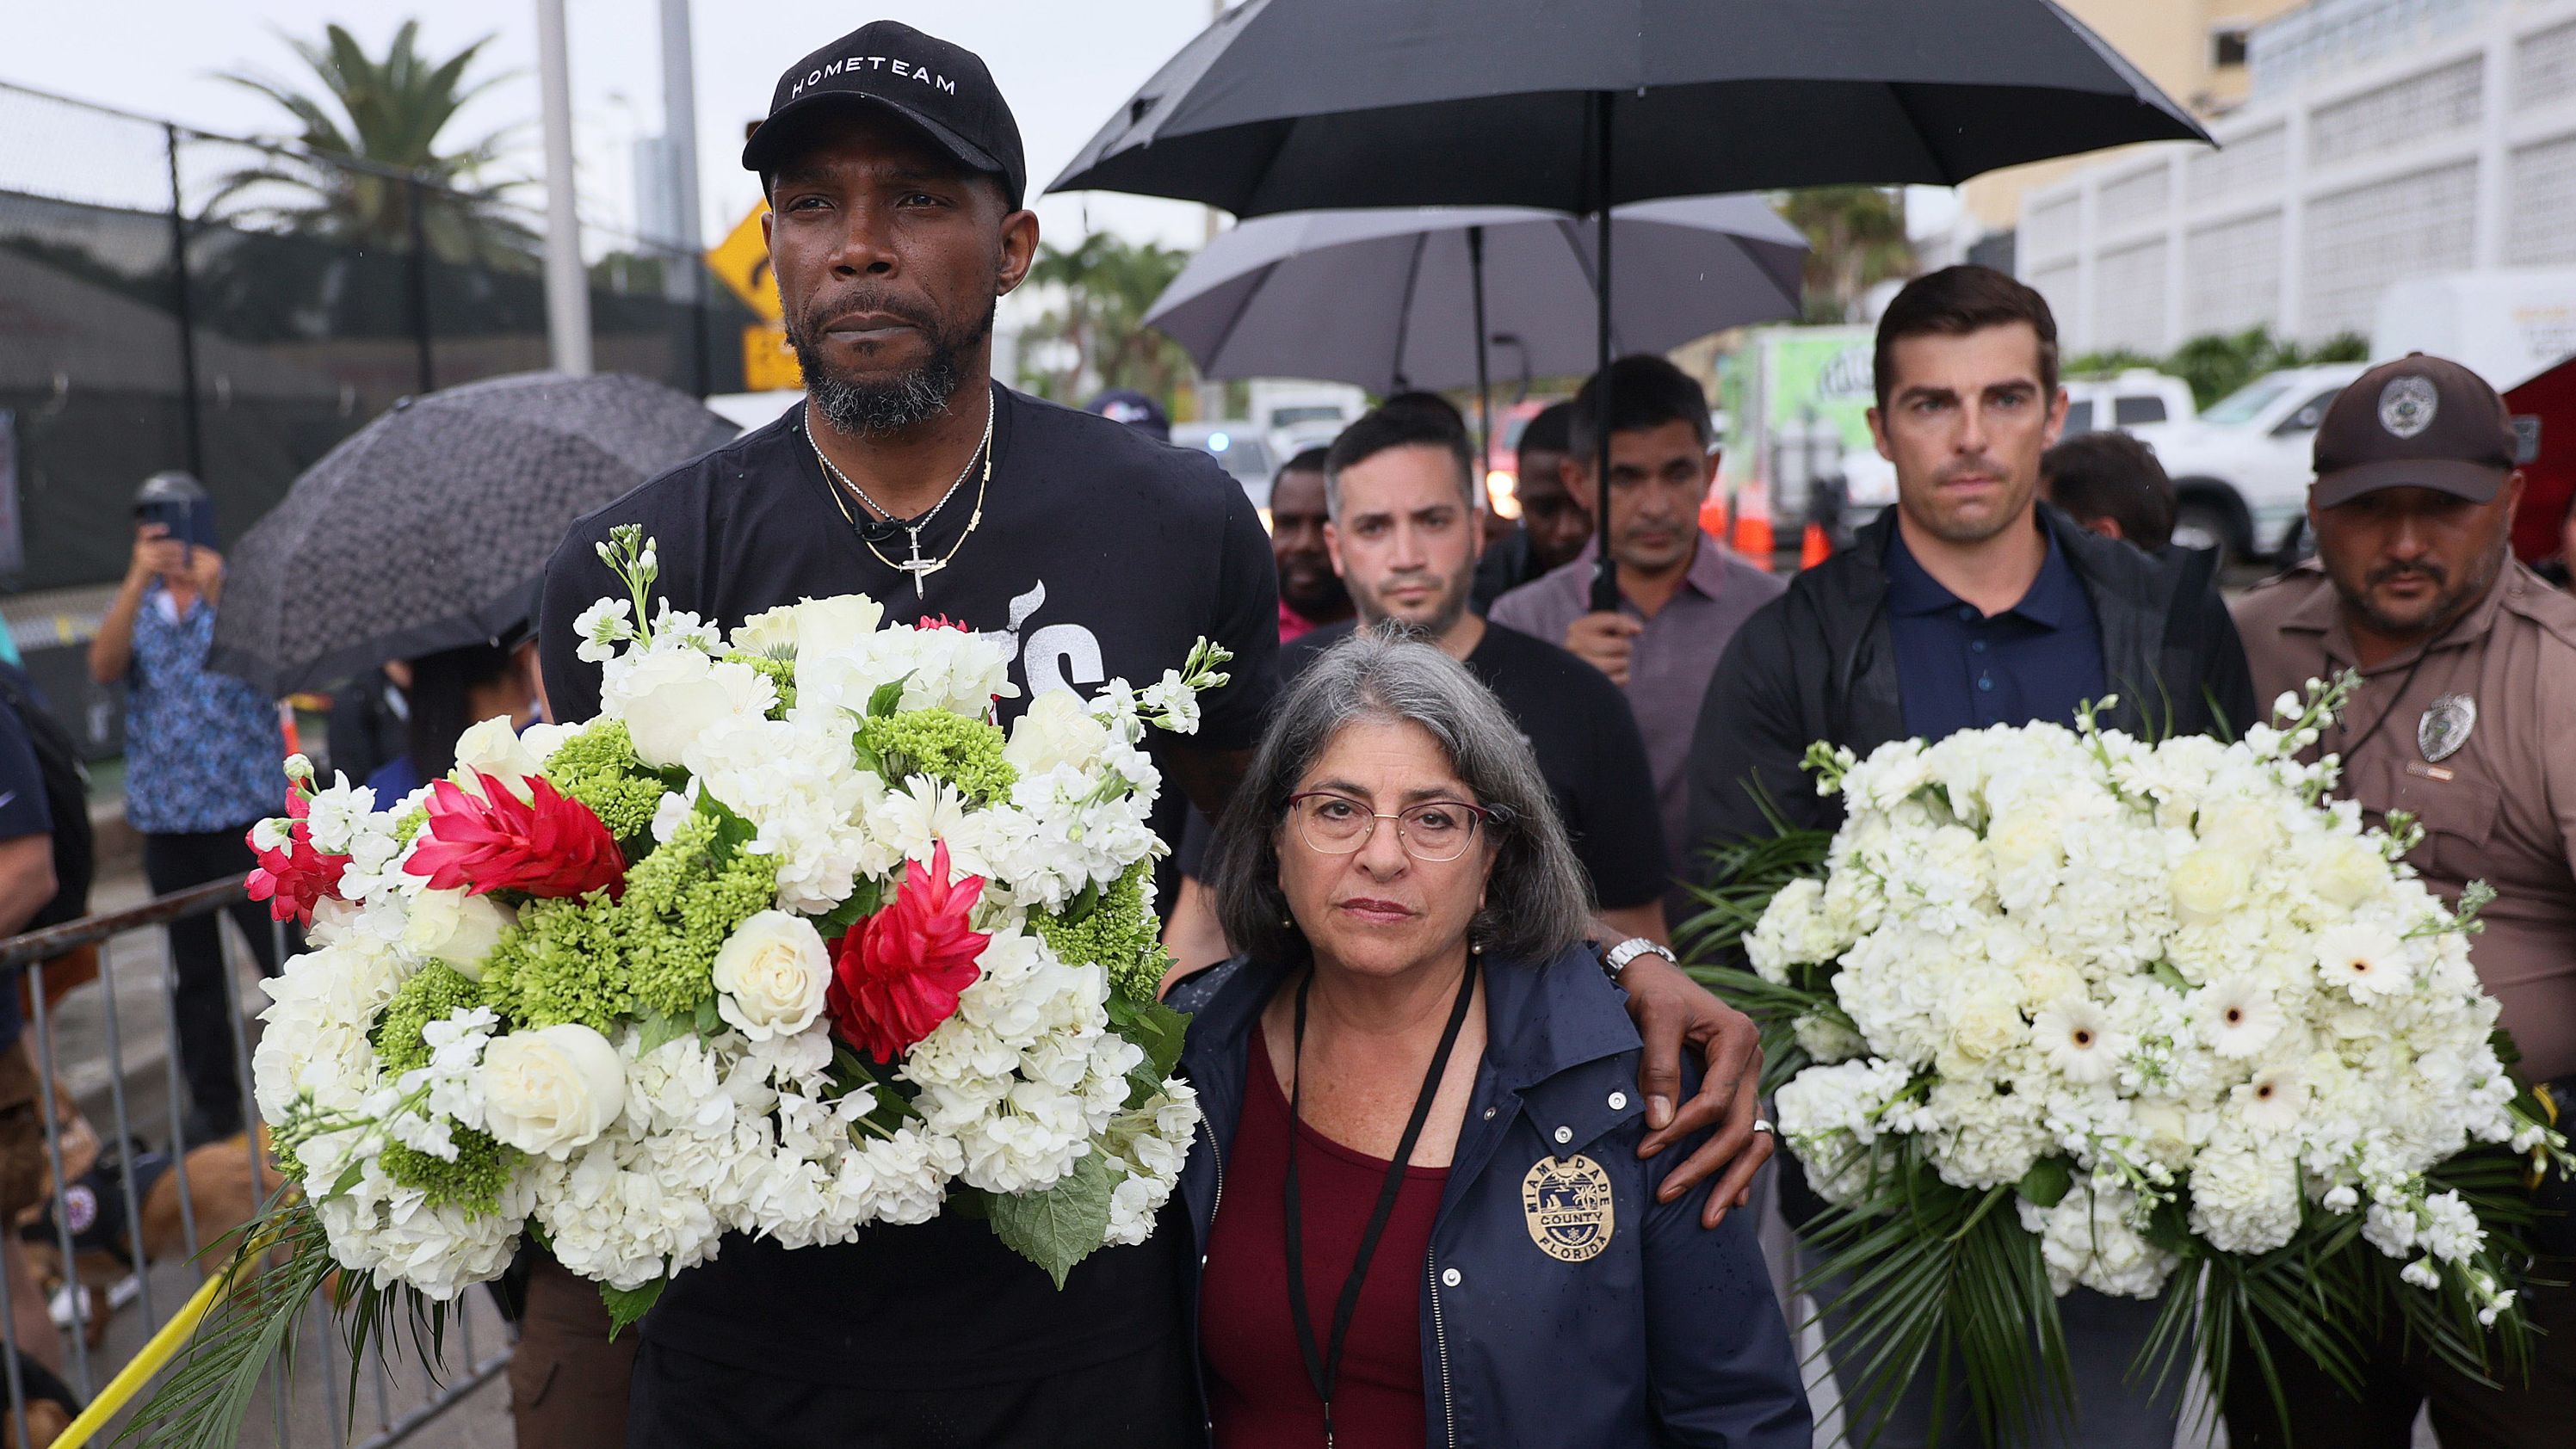 NBA basketball player Udonis Haslem, left, and Miami-Dade County Mayor Daniella Levine Cava arrive to pay their respects at a memorial near the building on June 30.